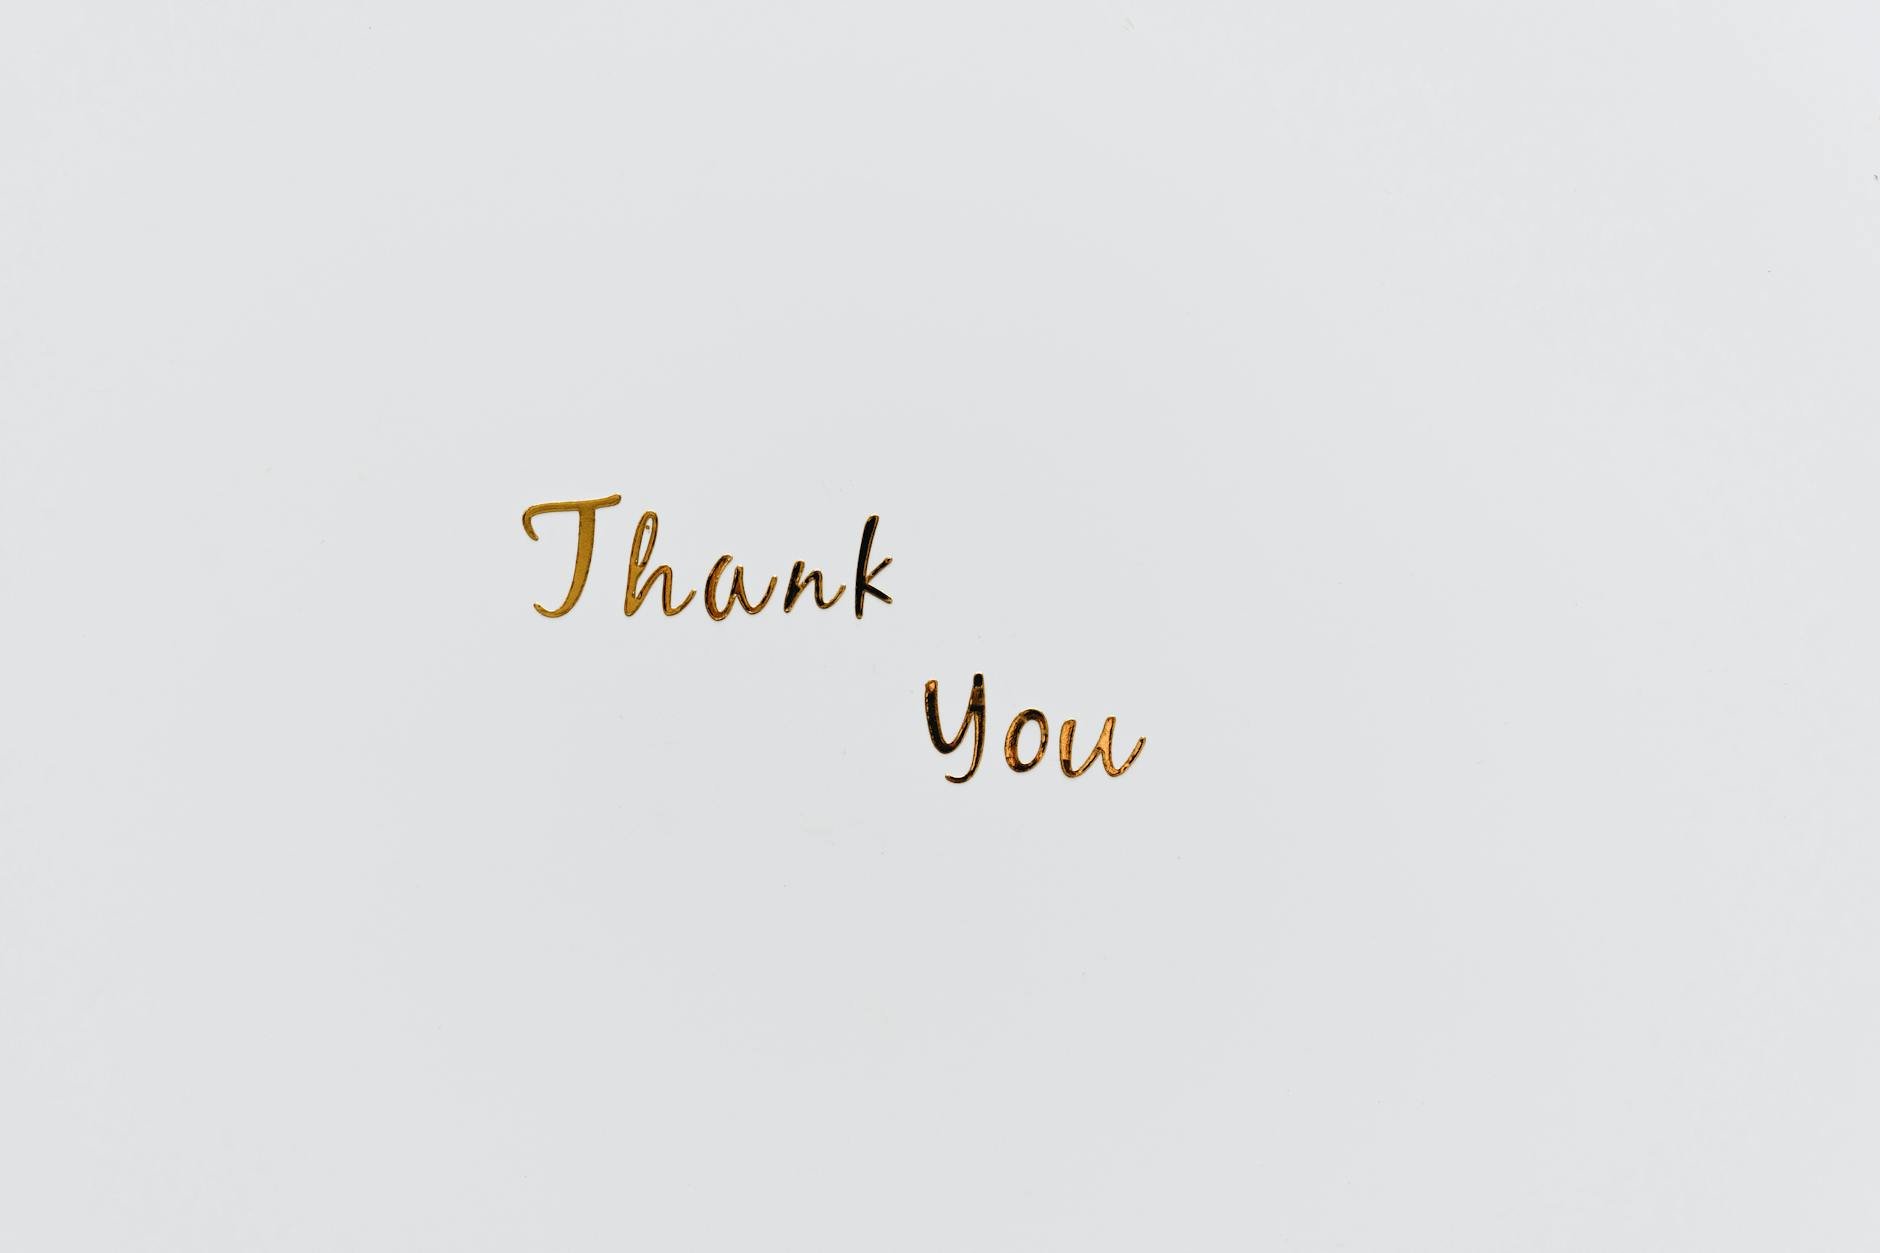 gold thank you text on a white surface